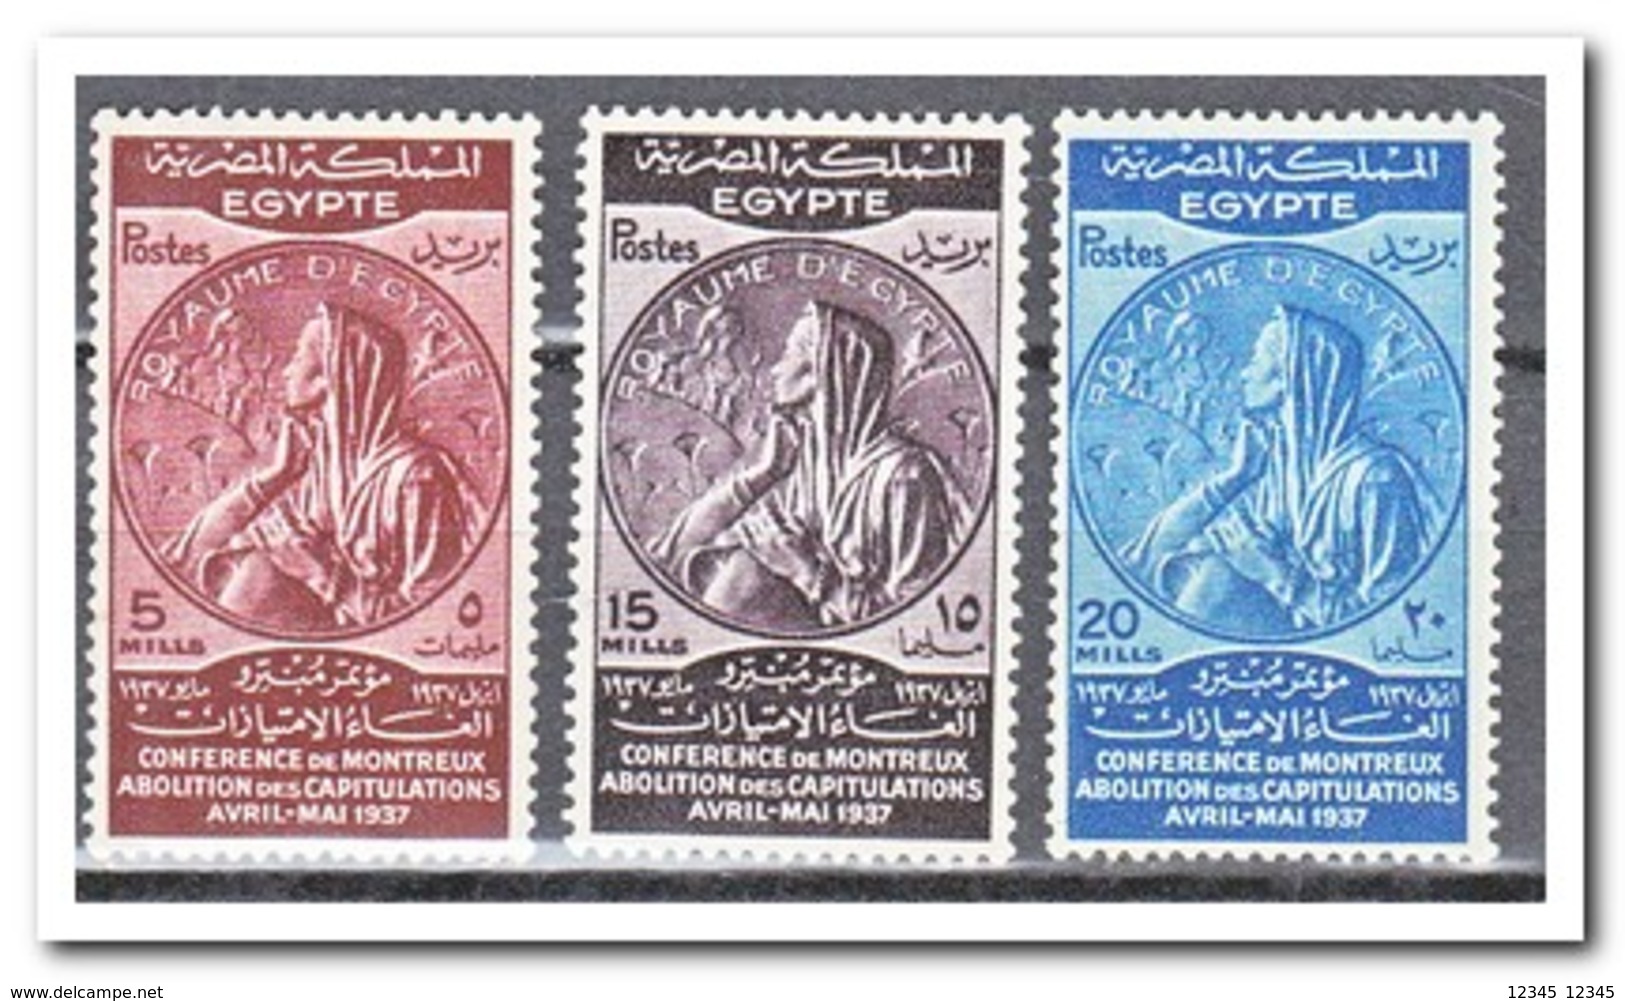 Egypte 1937, Plakker, MH, Medal, Lifting Of Surrenders As A Result Of The Montreux Treaties - Neufs